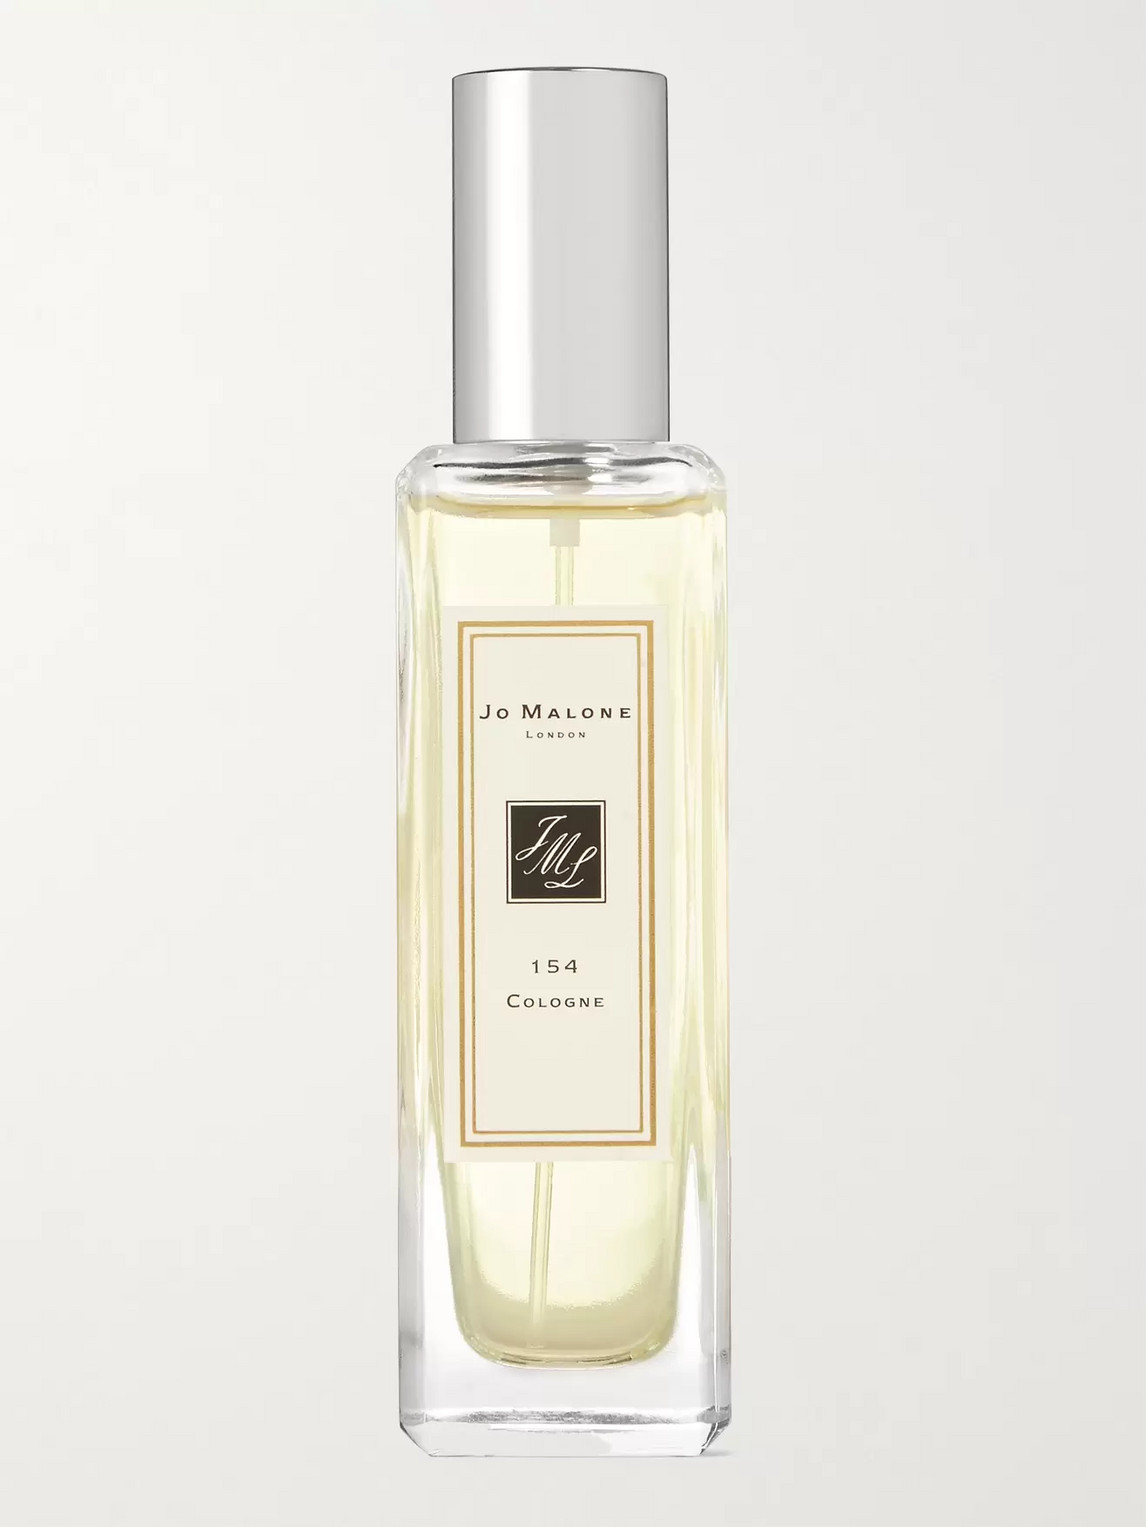 Jo Malone London 154 Cologne, 30ml In Colorless